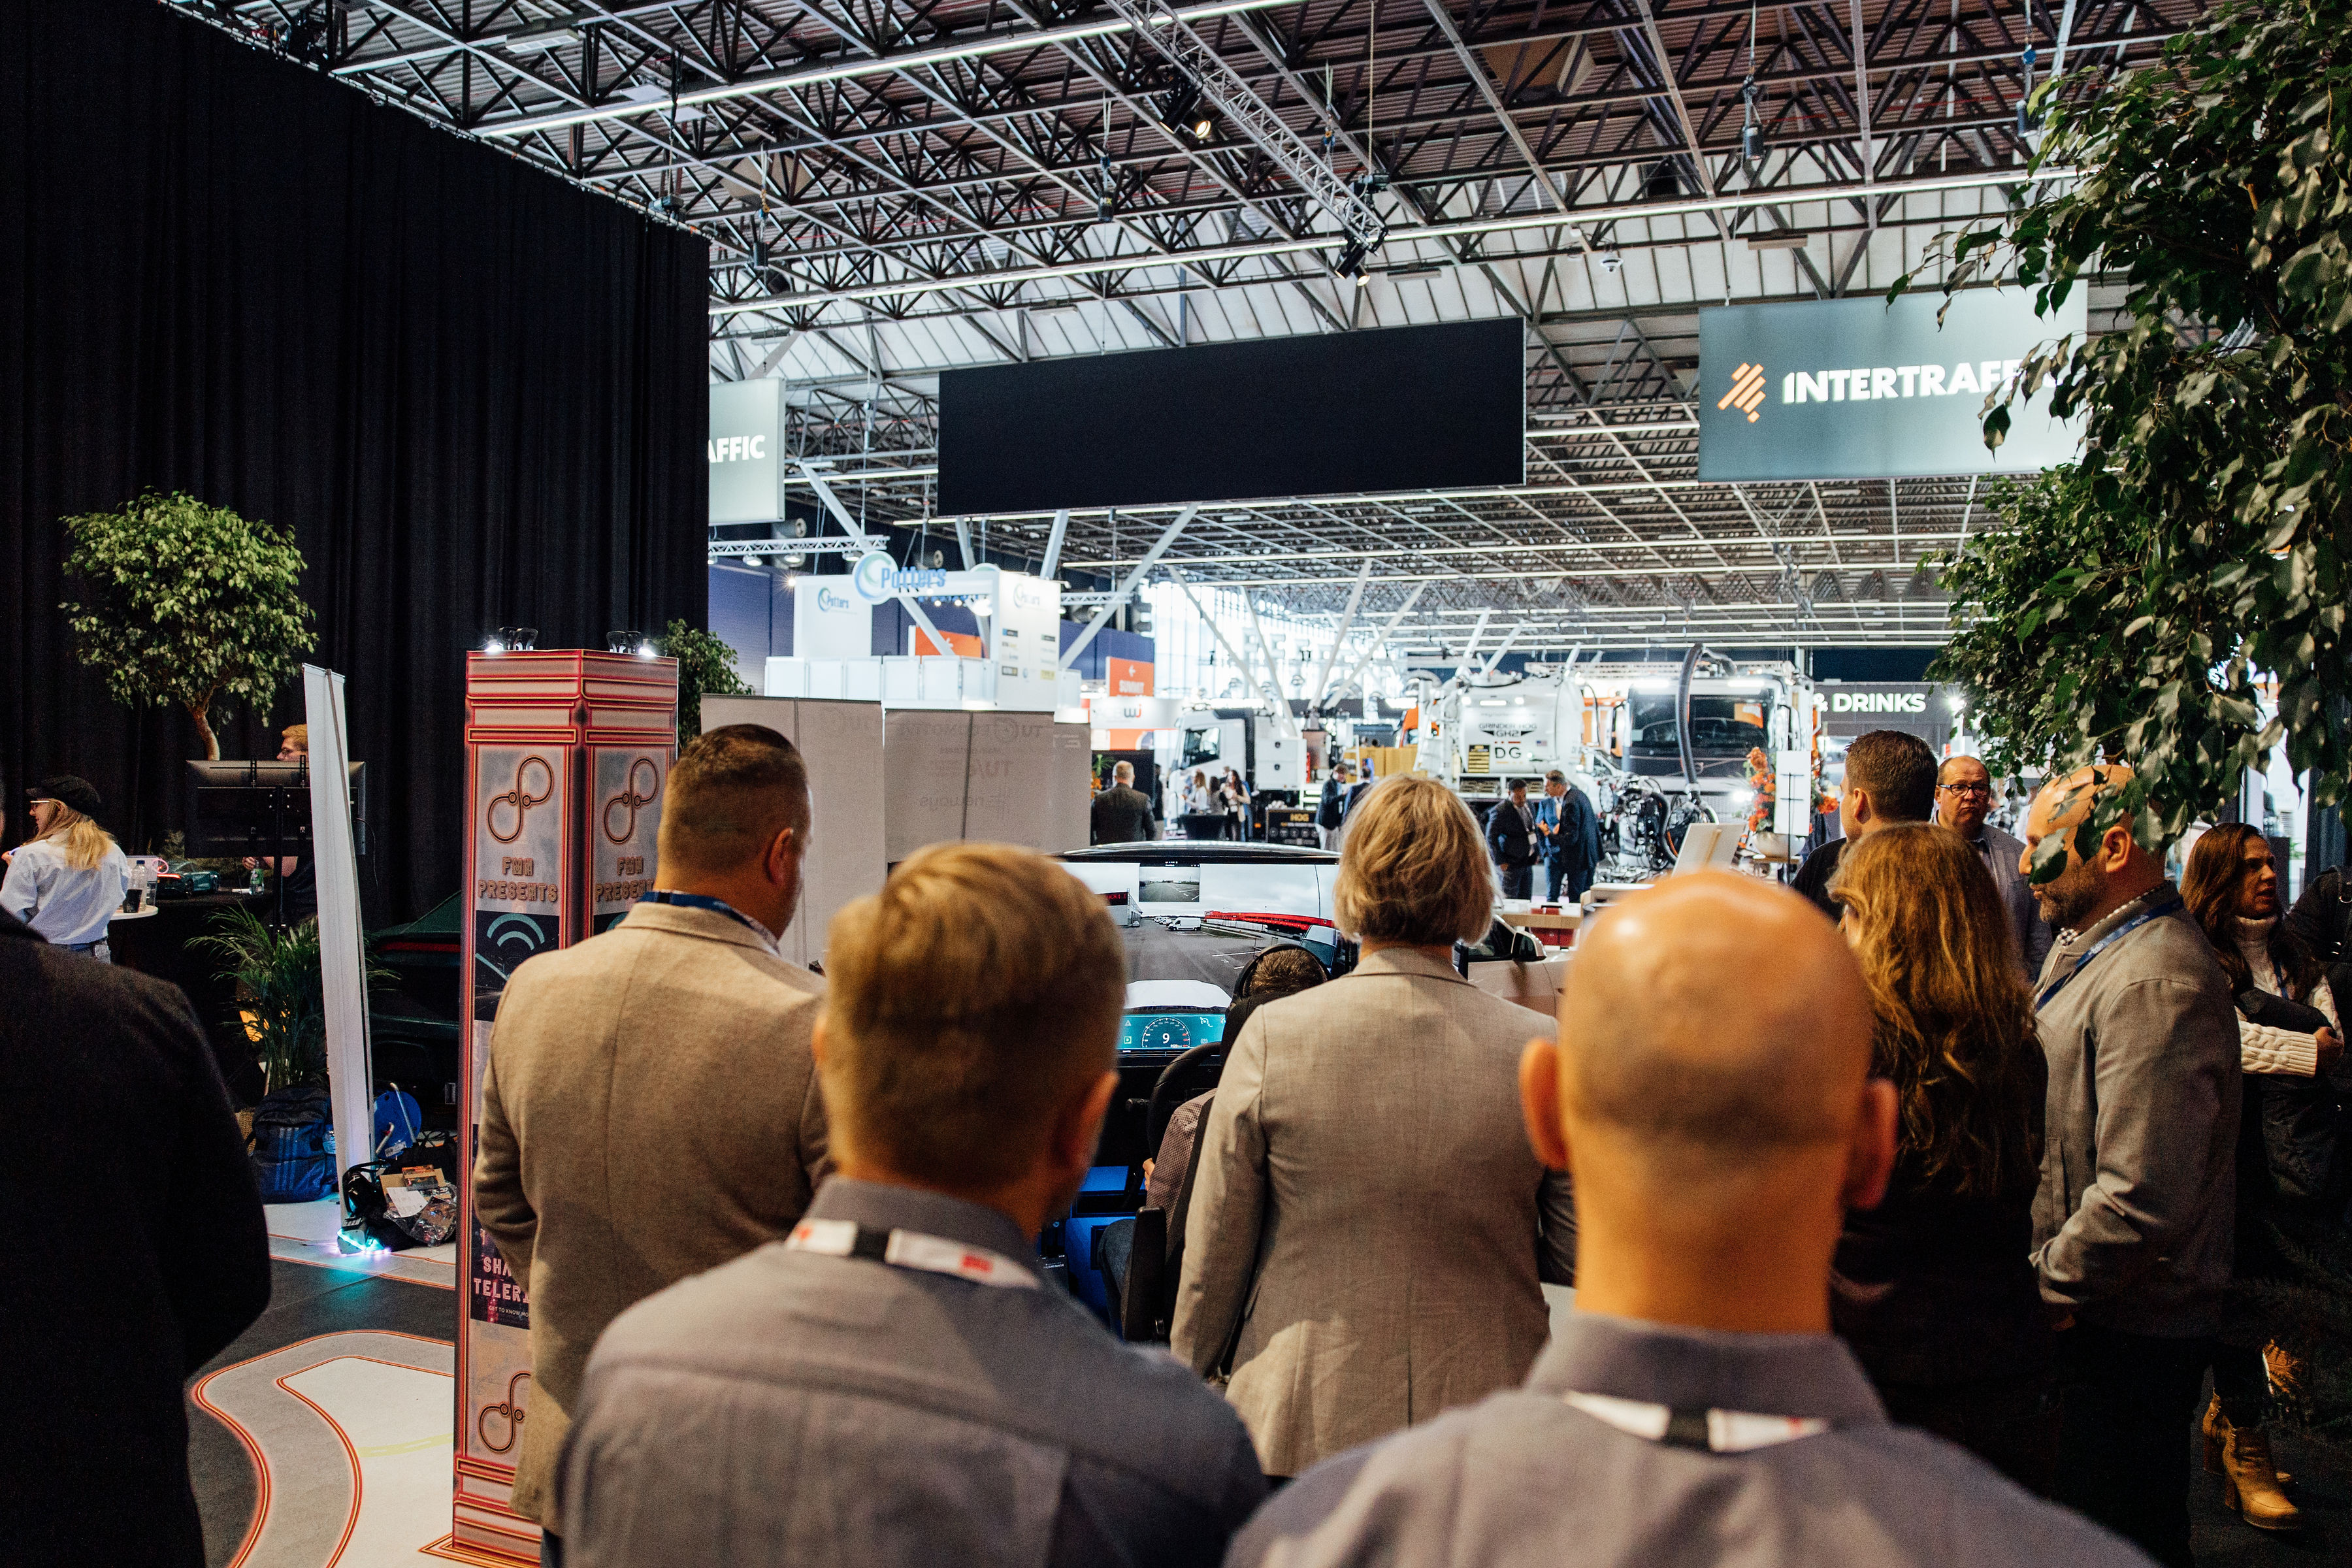  Intertraffic is running from 16 to 19 April in RAI Amsterdam, The Netherlands.